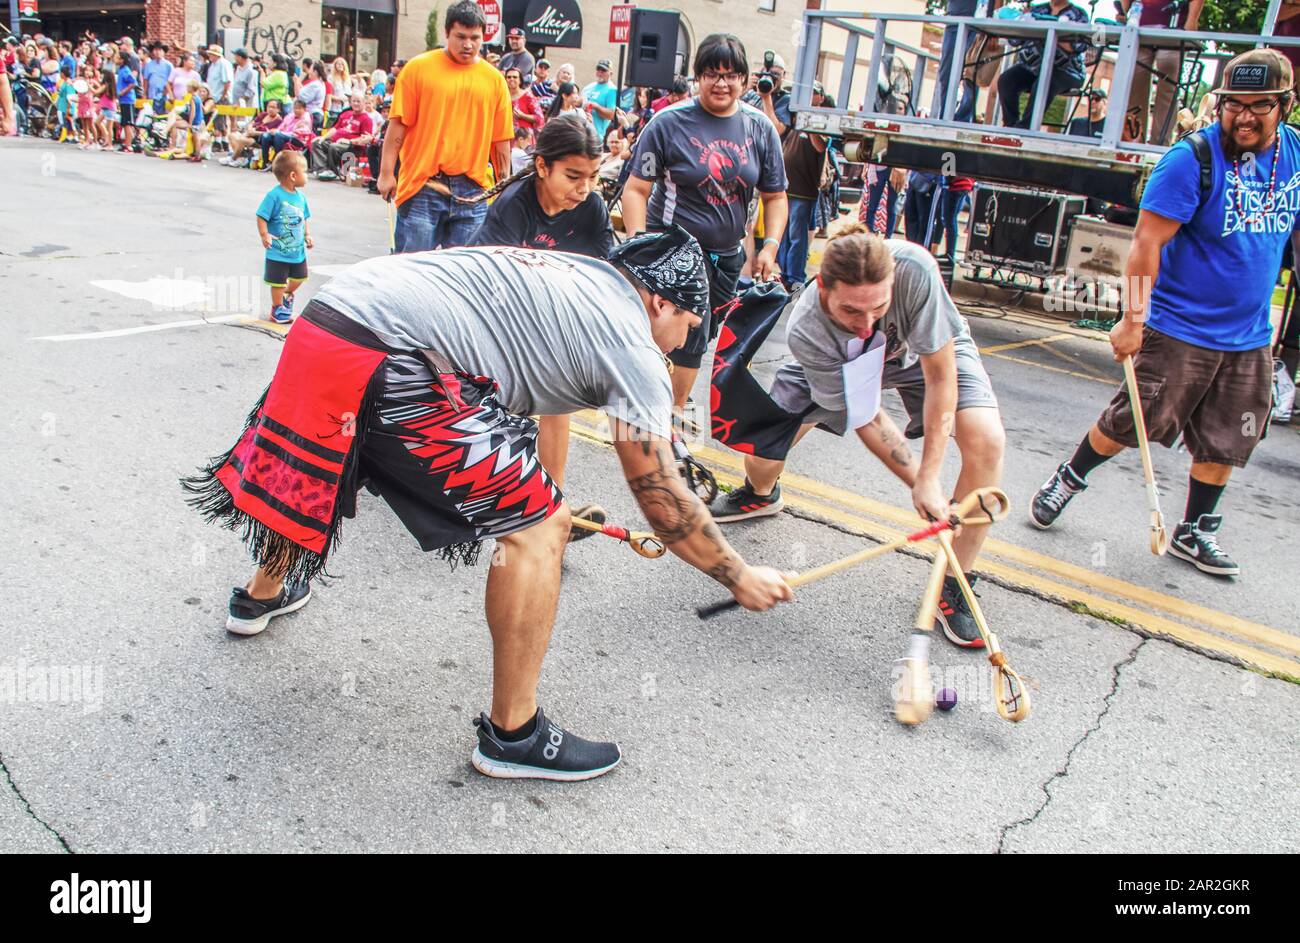 3 31 18 Tahlequah Usa Native American Young Men Playing Exhibition Game Of Traditional Stickball In The Middle Of The Street During Parade Funny Stock Photo Alamy